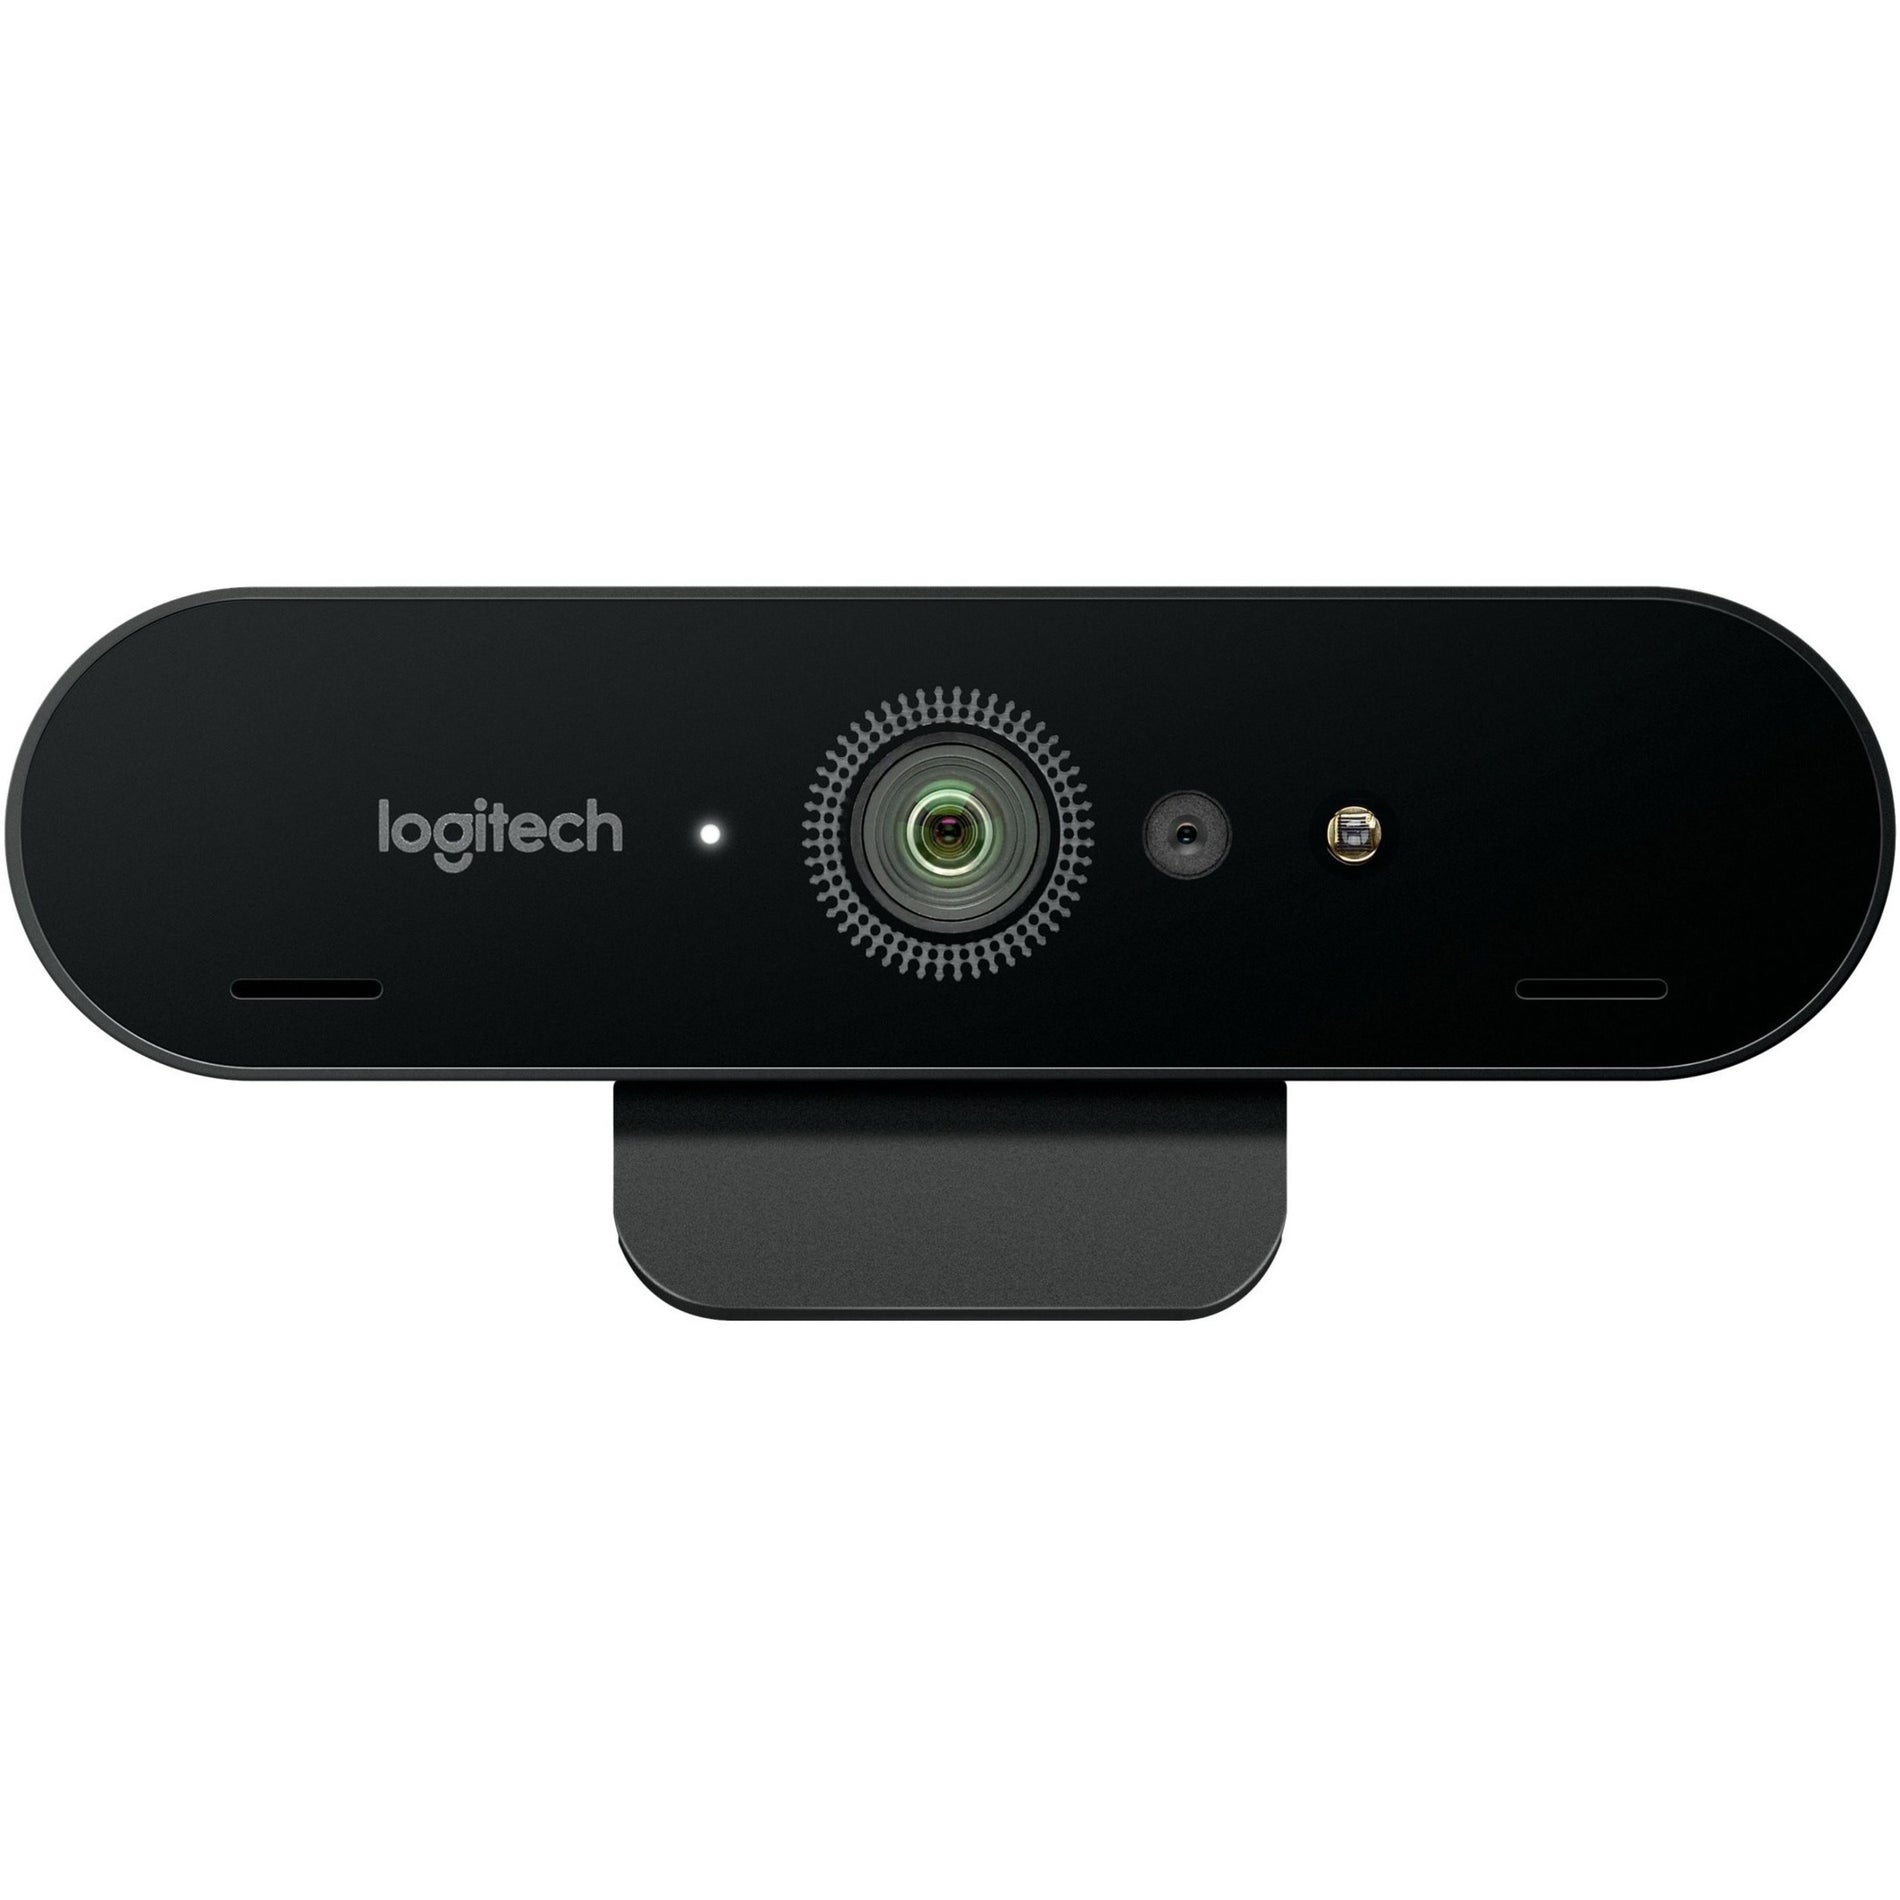 Logitech 960-001105 BRIO 4K Ultra HD Webcam with RightLight 3 with HDR, 90 fps, USB 3.0